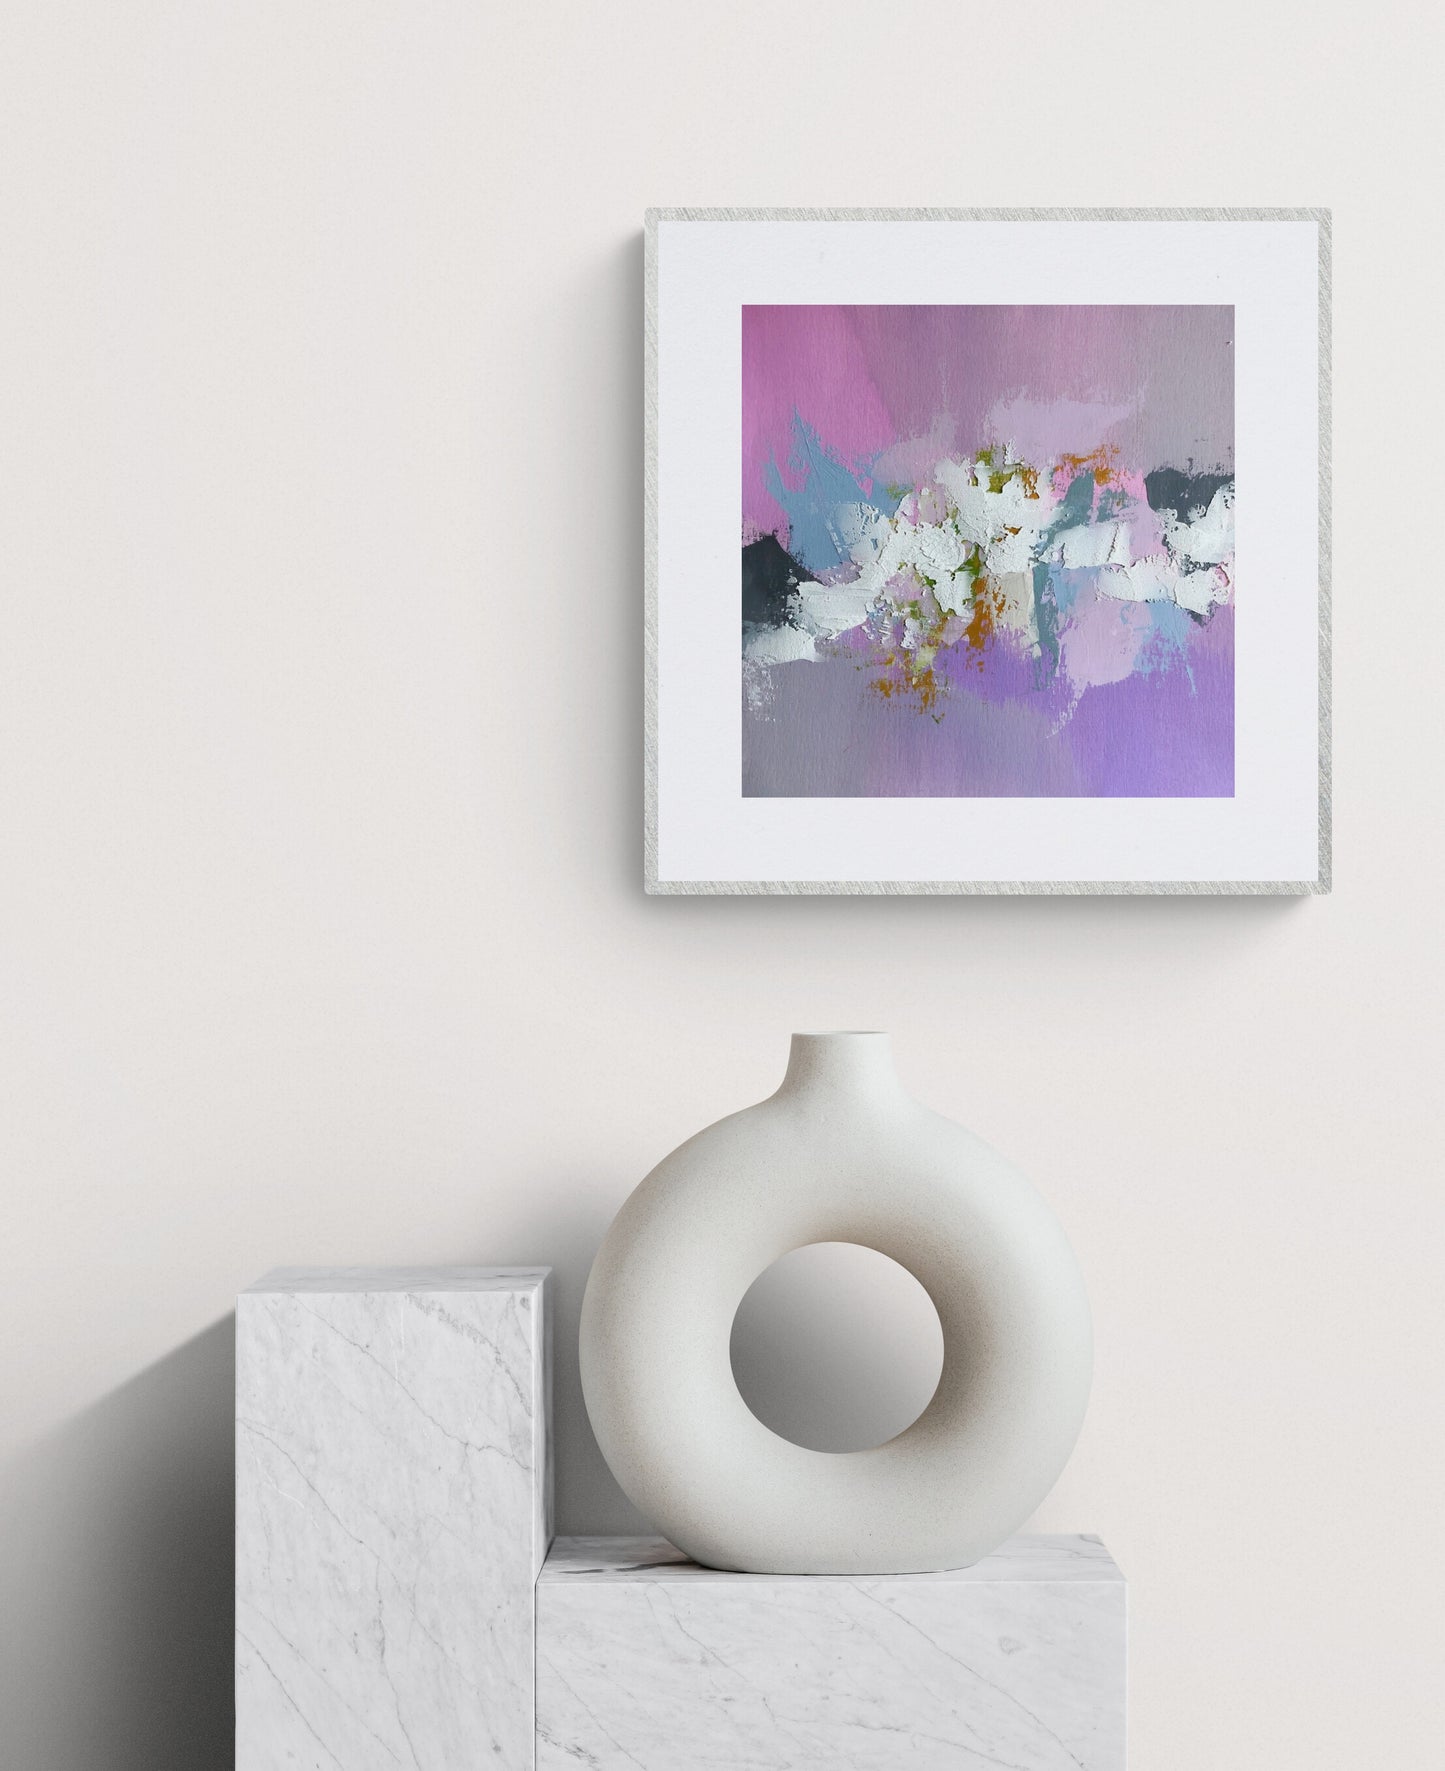 "At The Beginning" Series 10 | Abstract Artwork | Fine Art https://www.sophiahyunart.com/products/at-the-beginning-series-number-ten-2 Original Mixed Media on Acrylic Paper. Size: 12" x 12". Unframed. One of A Kind Abstract Artwork. Hand signed by Artist and dated in the back of the painting. Certificate of Authenticity 